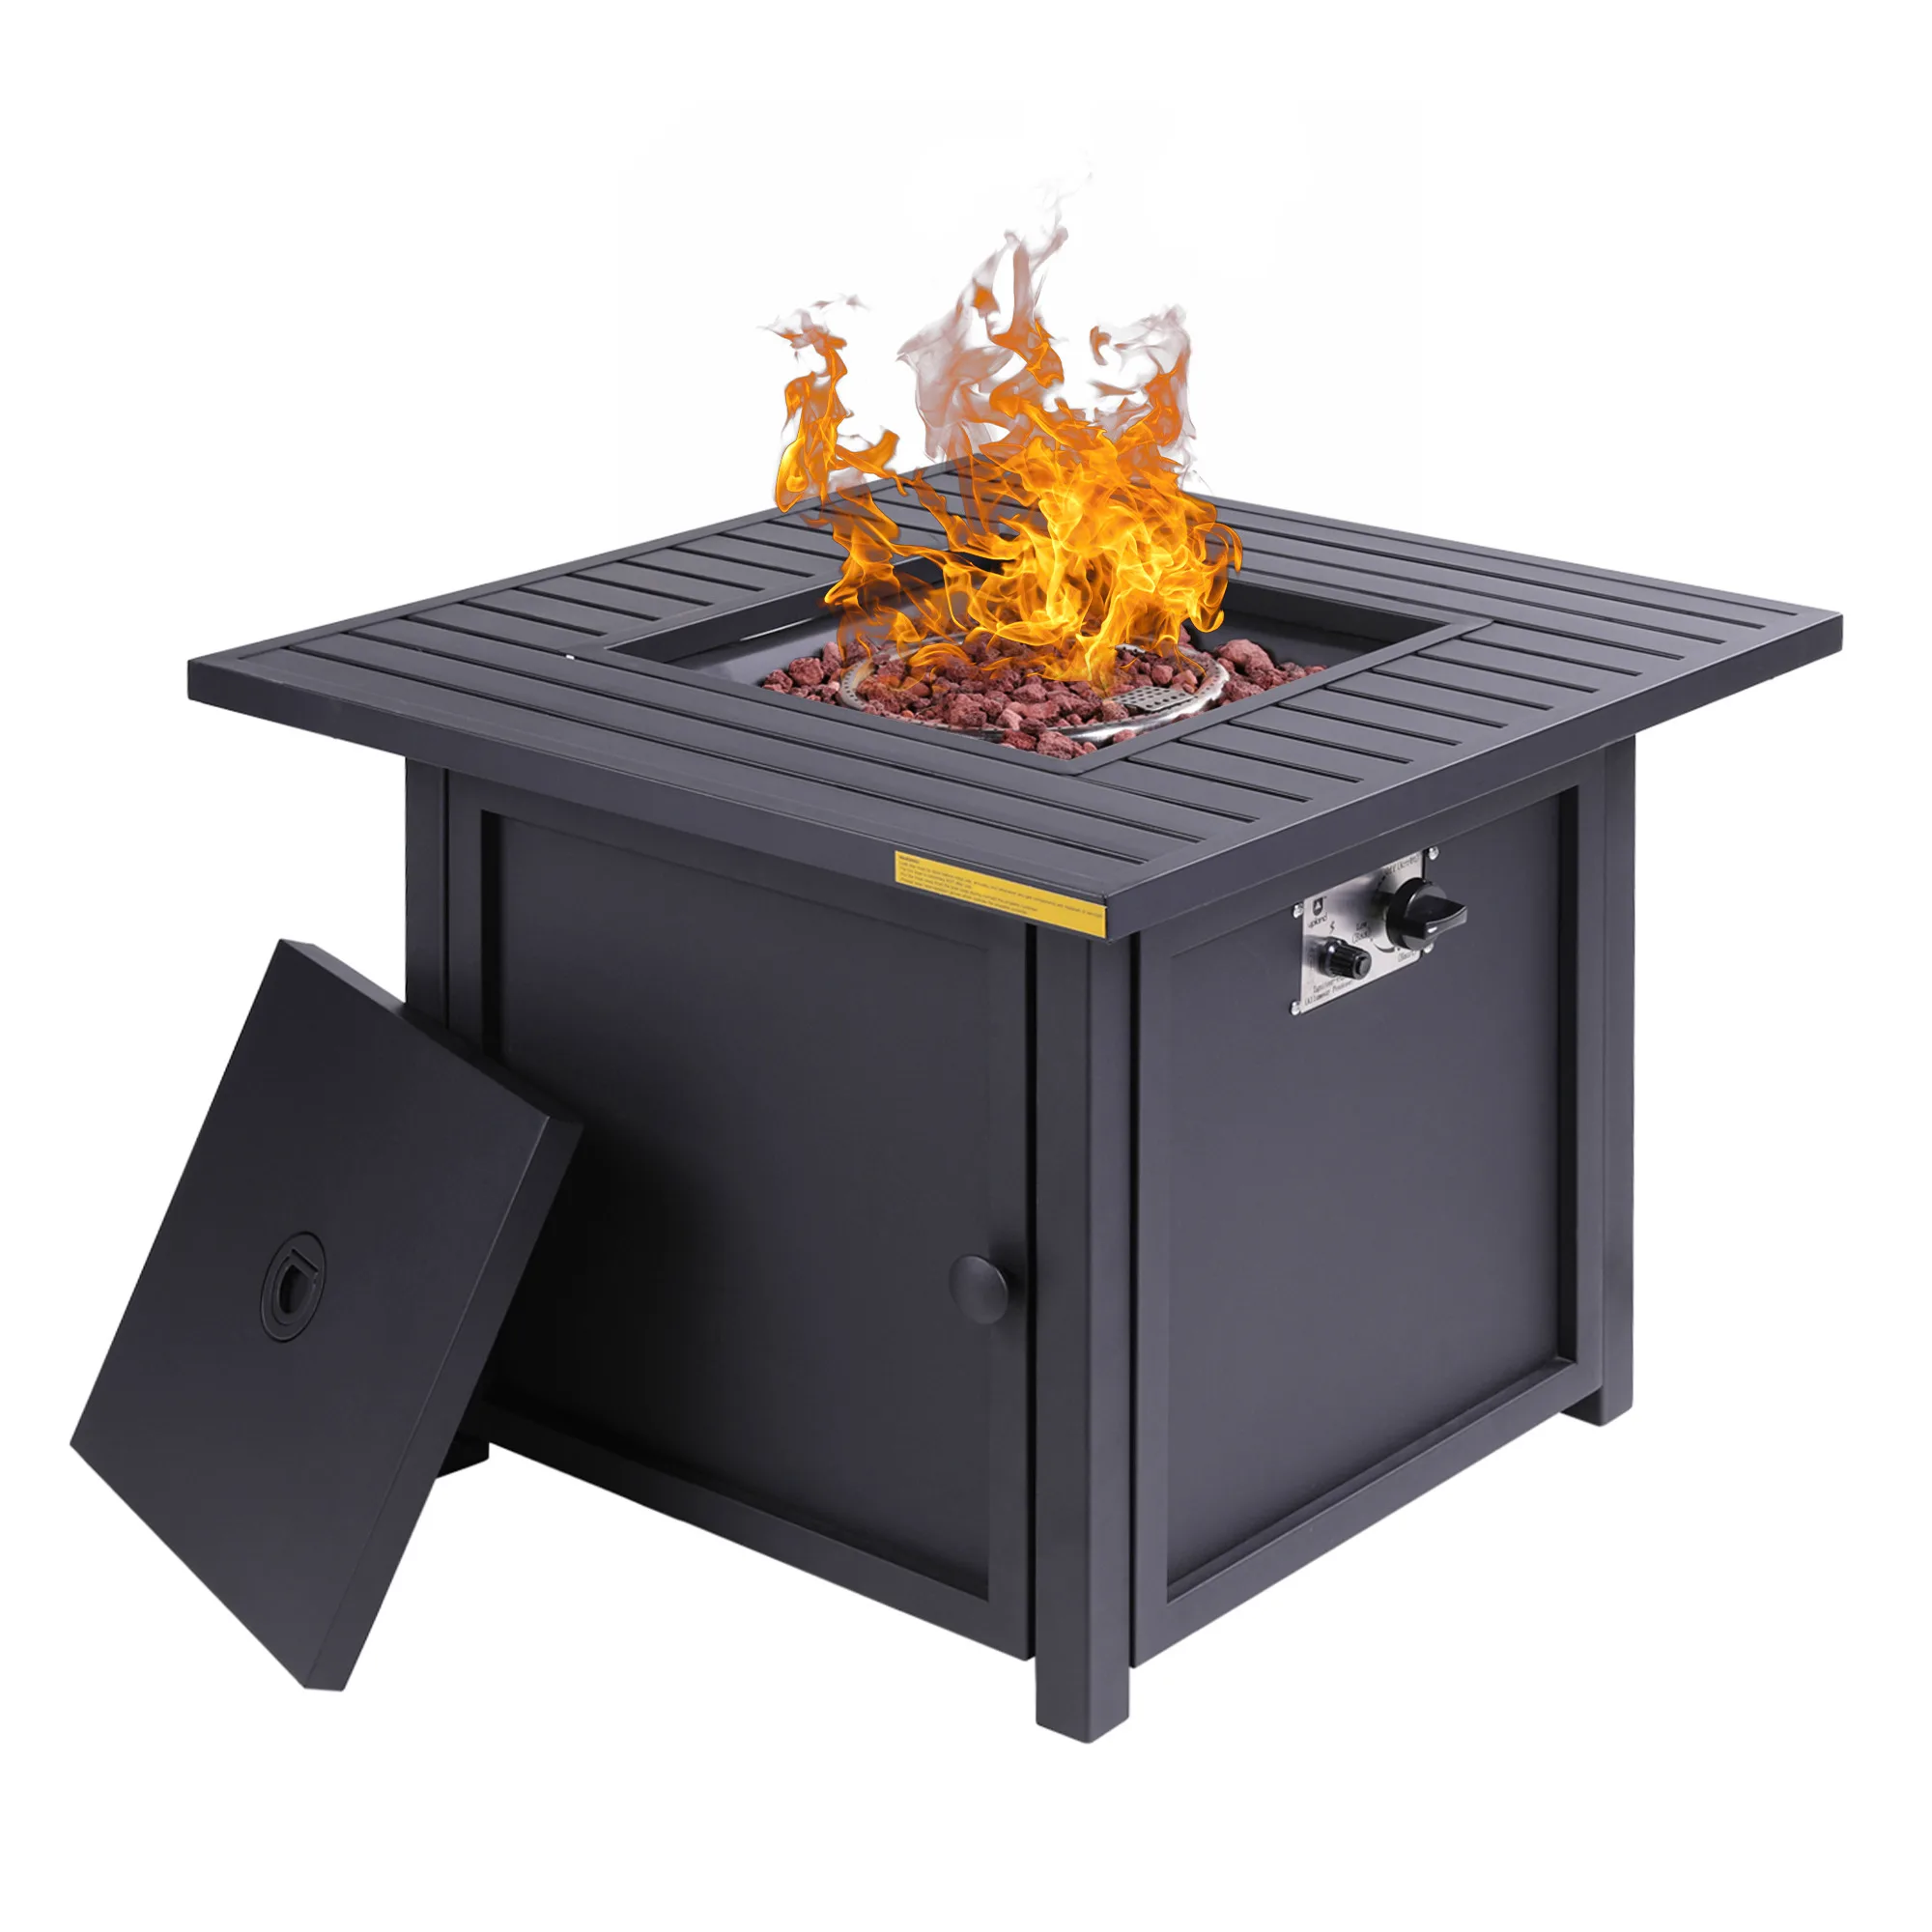 28” Gas Fire Pit Table 50,000 BTU Square Outdoor Gas Firepits with Lava Rocks & Water-Proof Cover, Black